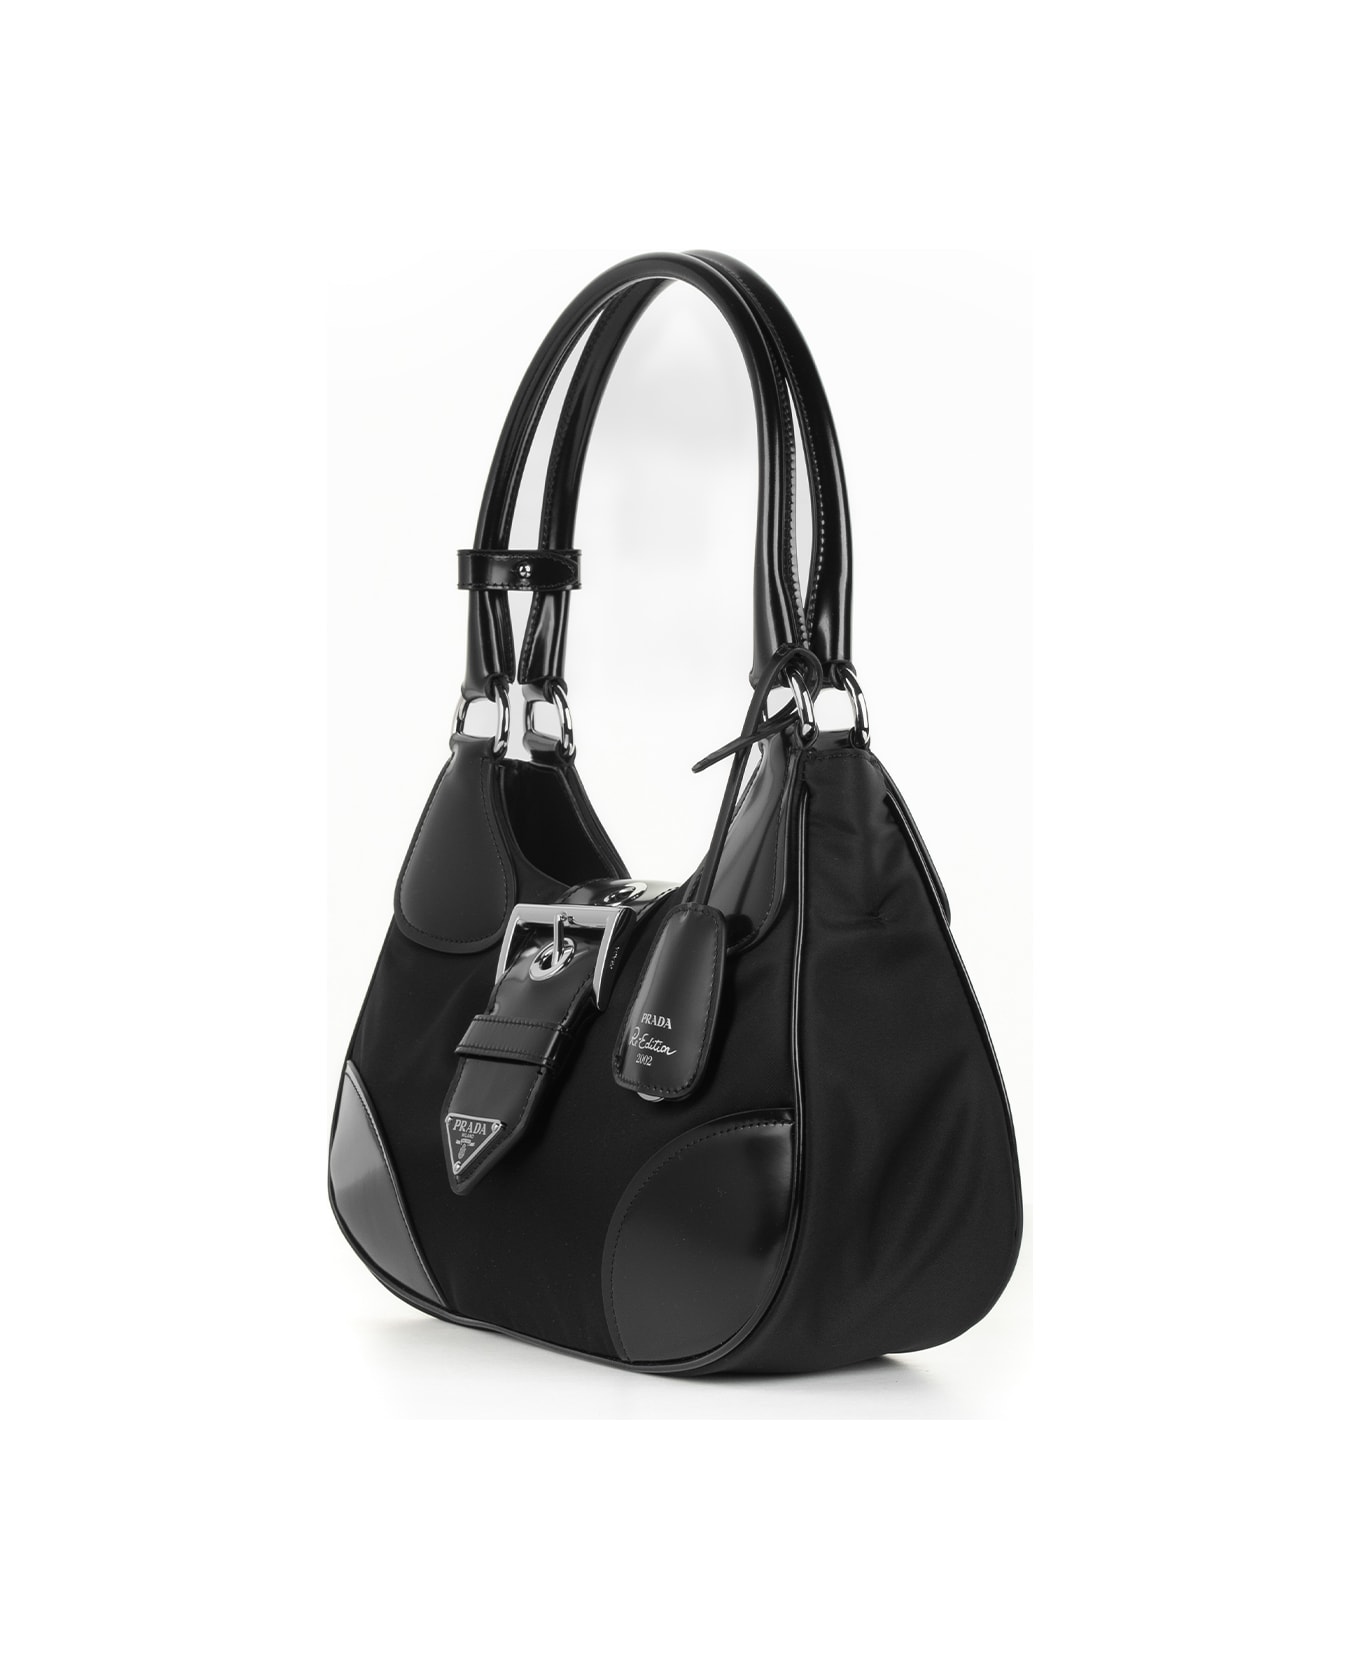 Prada Leather Shoulder Bag With Buckle - NERO トートバッグ